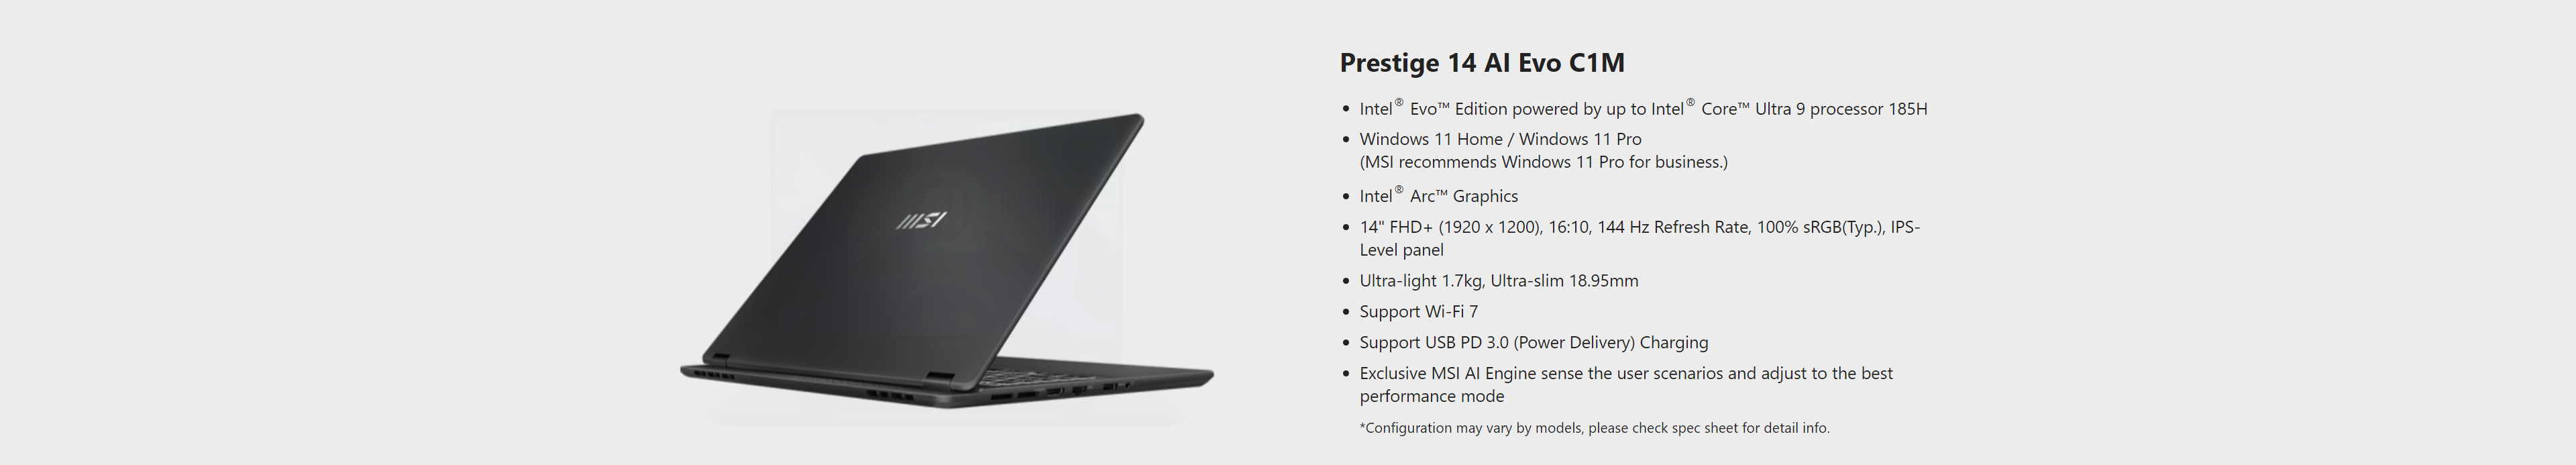 A large marketing image providing additional information about the product MSI Prestige 14 AI Evo C1MG-016AU 14" 144Hz Ultra 7 155H Win 11 Notebook - Additional alt info not provided